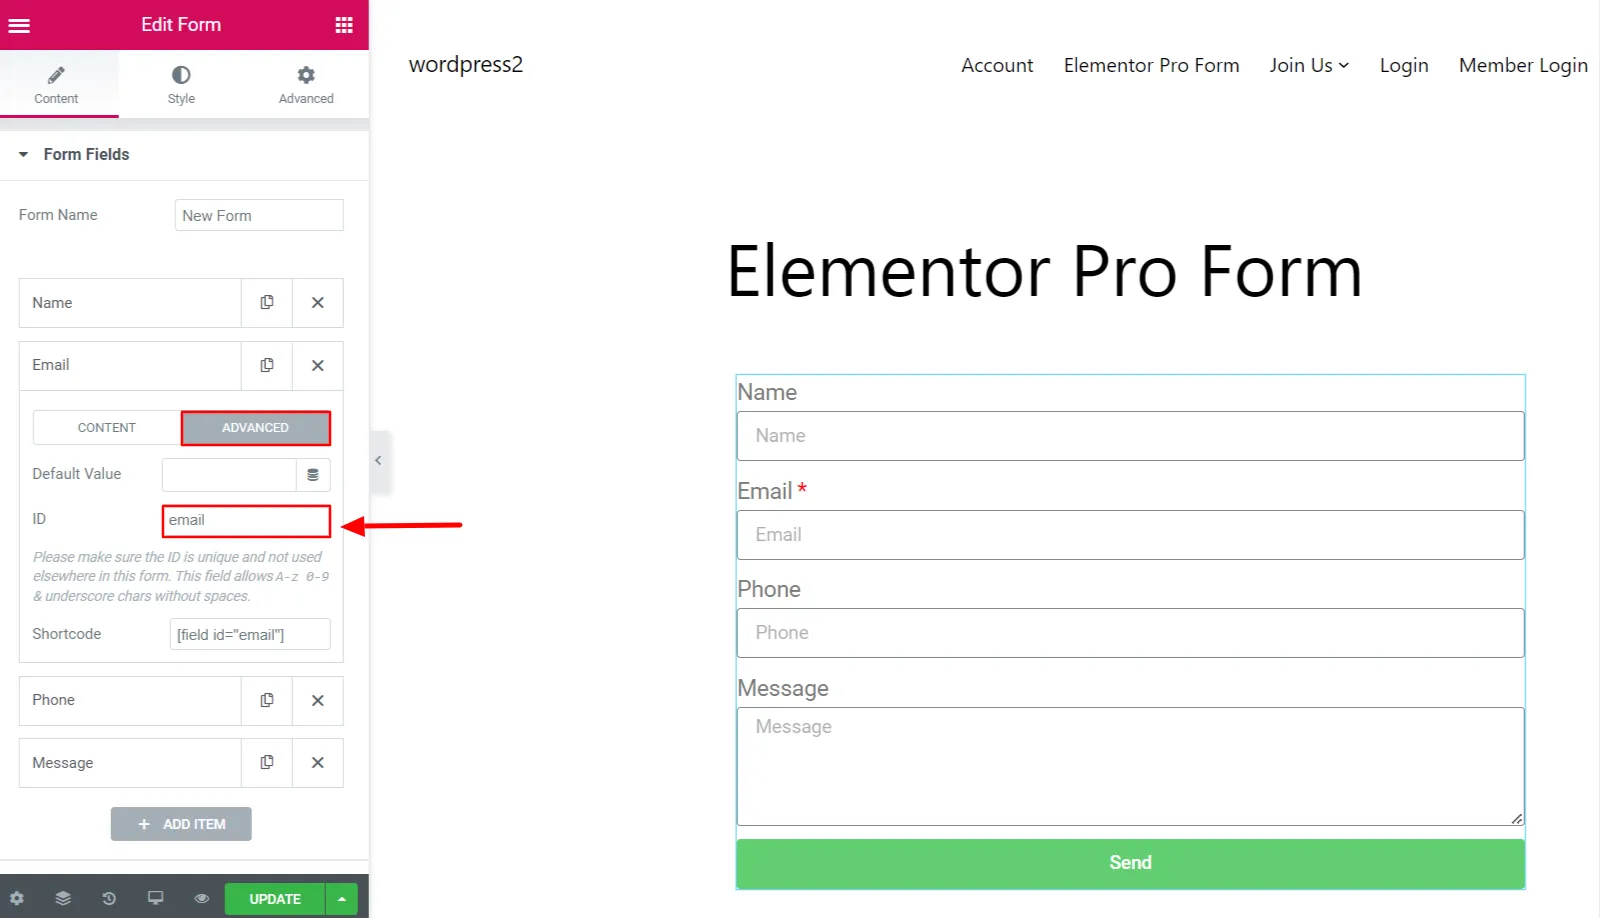 Elementor Pro Form - Note email field ID